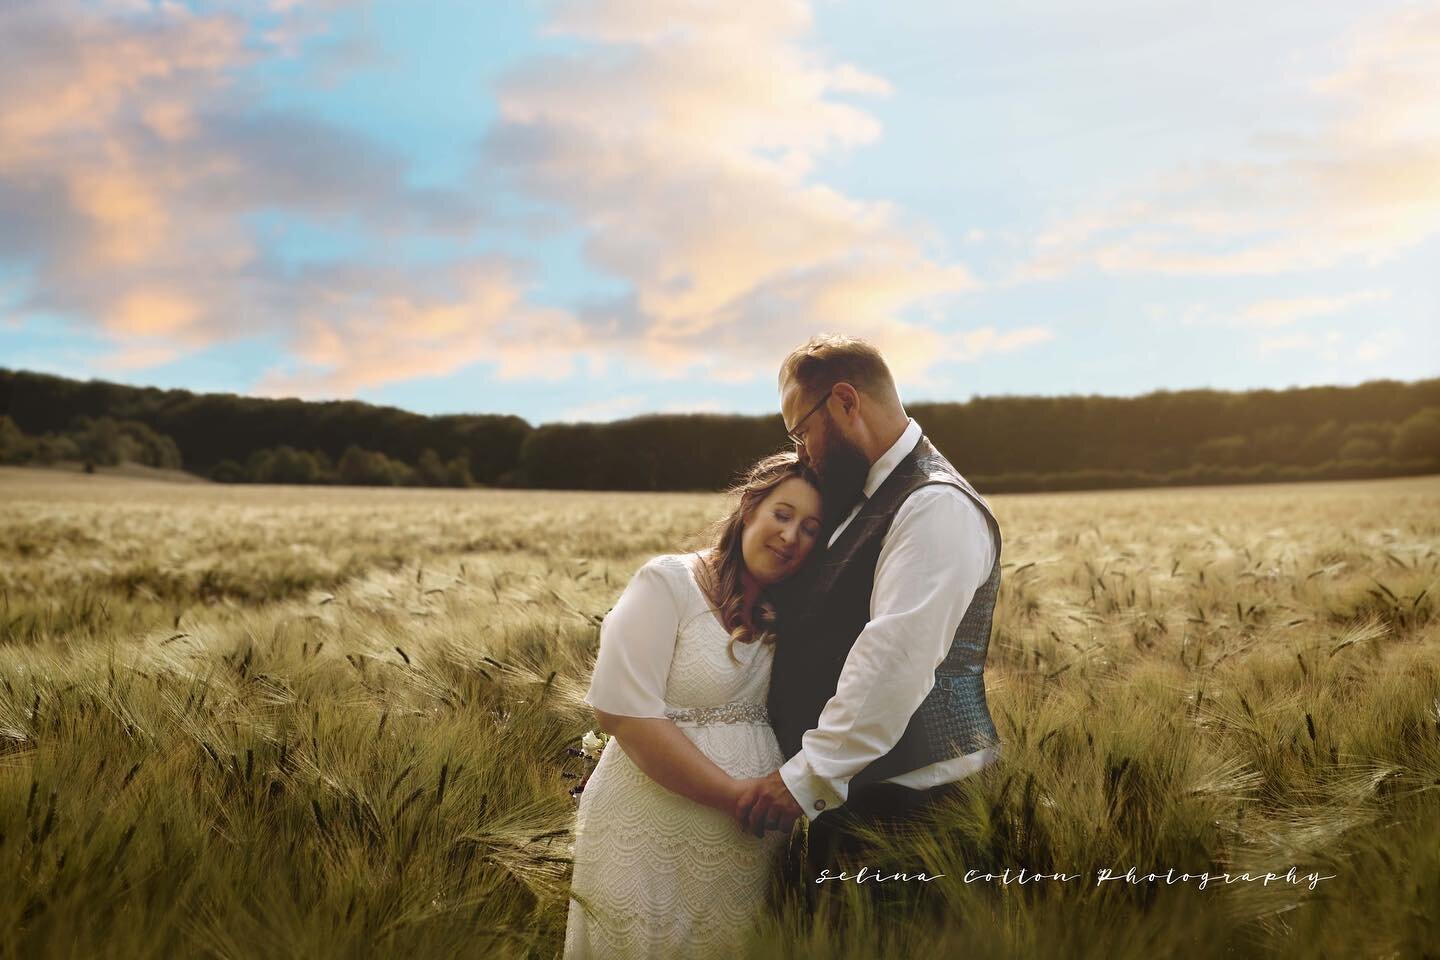 This wedding ❤️

Next to the truly stunning venue that is Wickbottom Barn was this equally stunning field! 

Congratulations to the new Mr&amp;Mrs, I hope you like your sneak peek!

(Small disclaimer; no crops were harmed, photoshop is a wonderful to